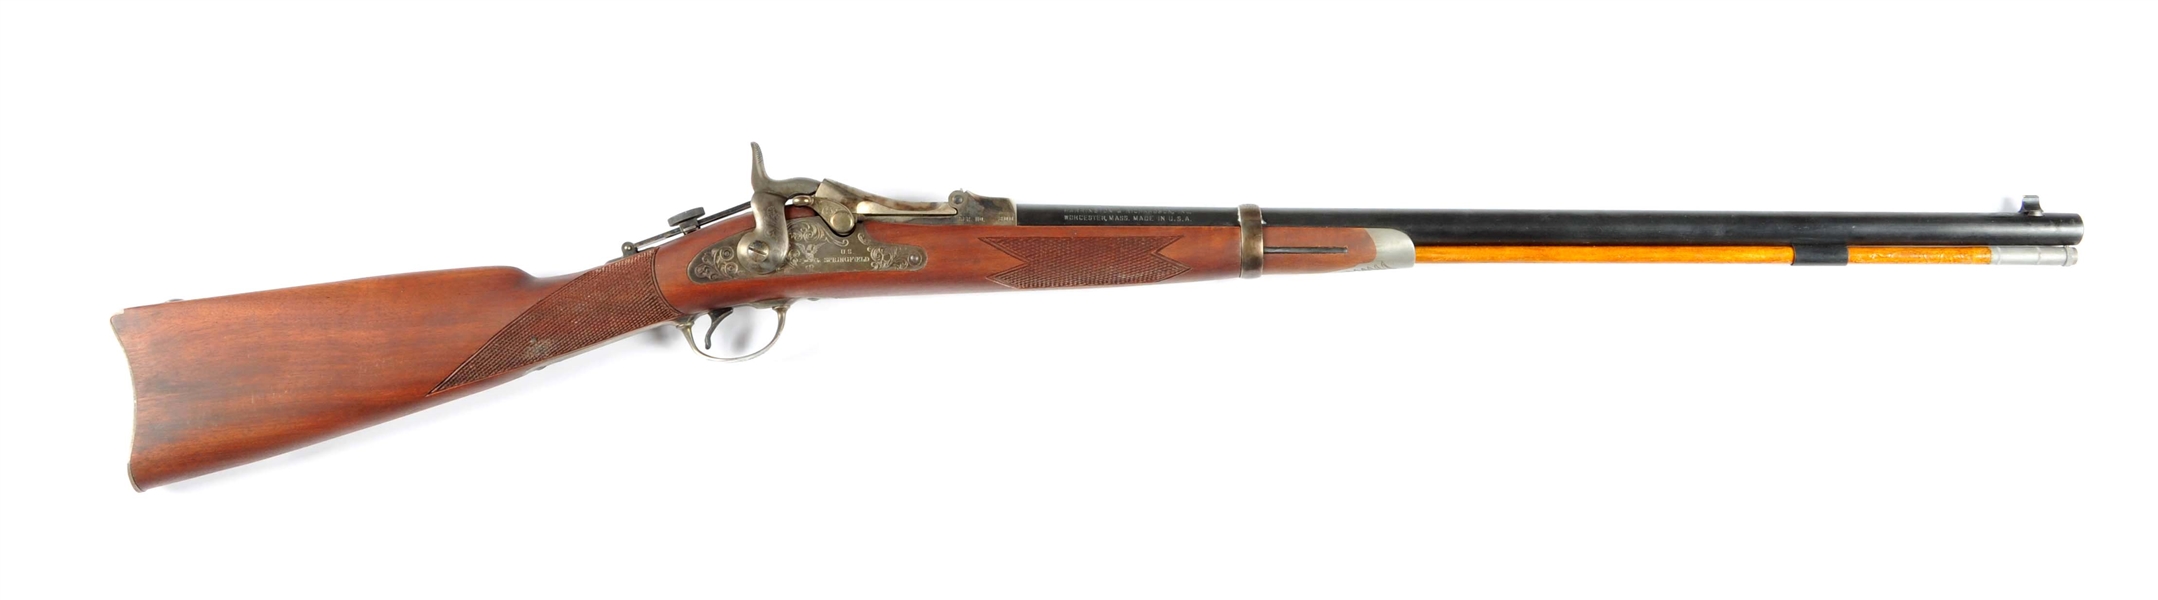 (A) BOXED H&R OFFICERS MODEL TRAPDOOR RIFLE.